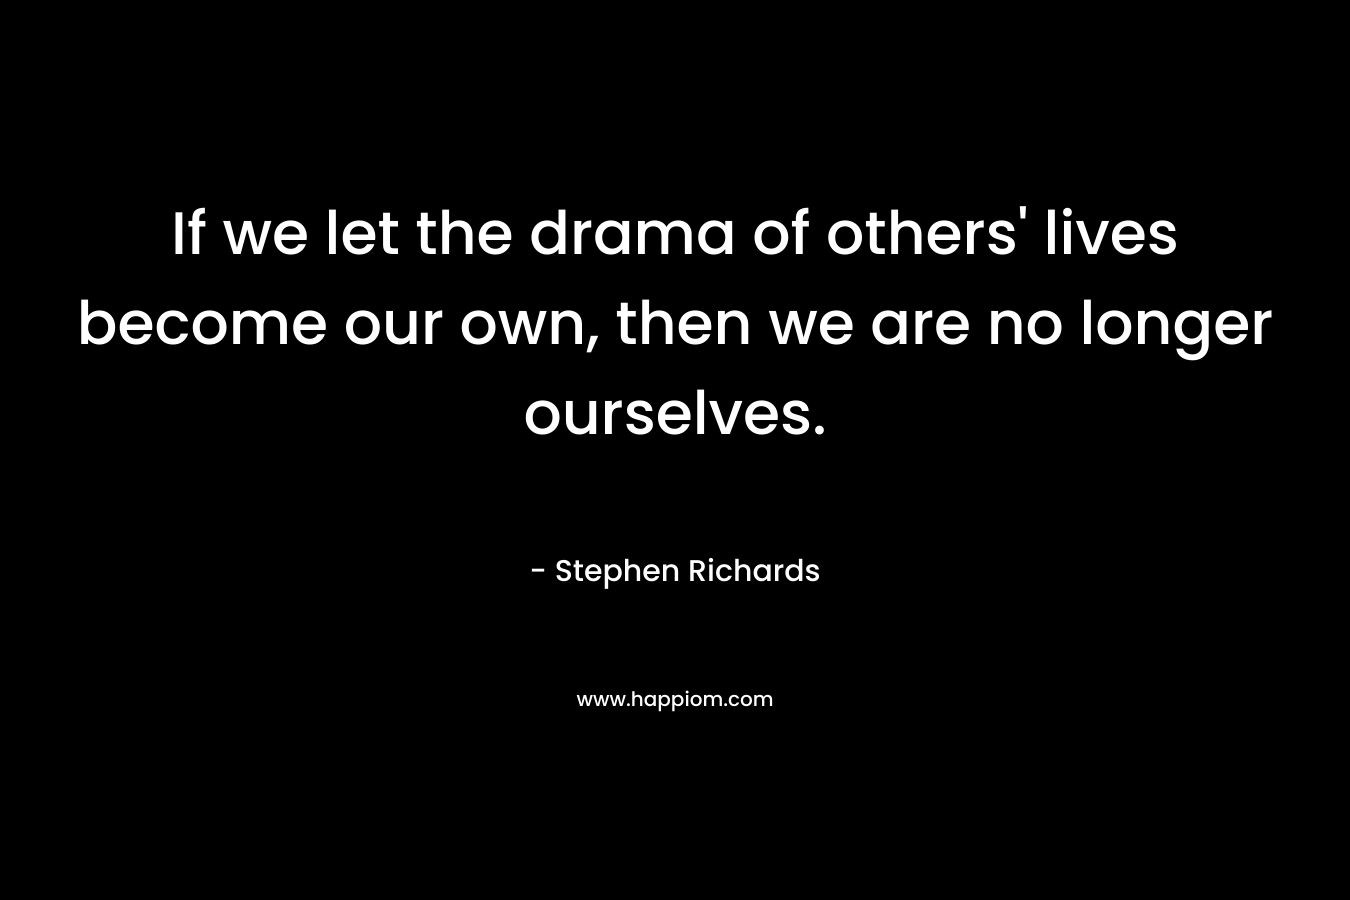 If we let the drama of others’ lives become our own, then we are no longer ourselves. – Stephen Richards